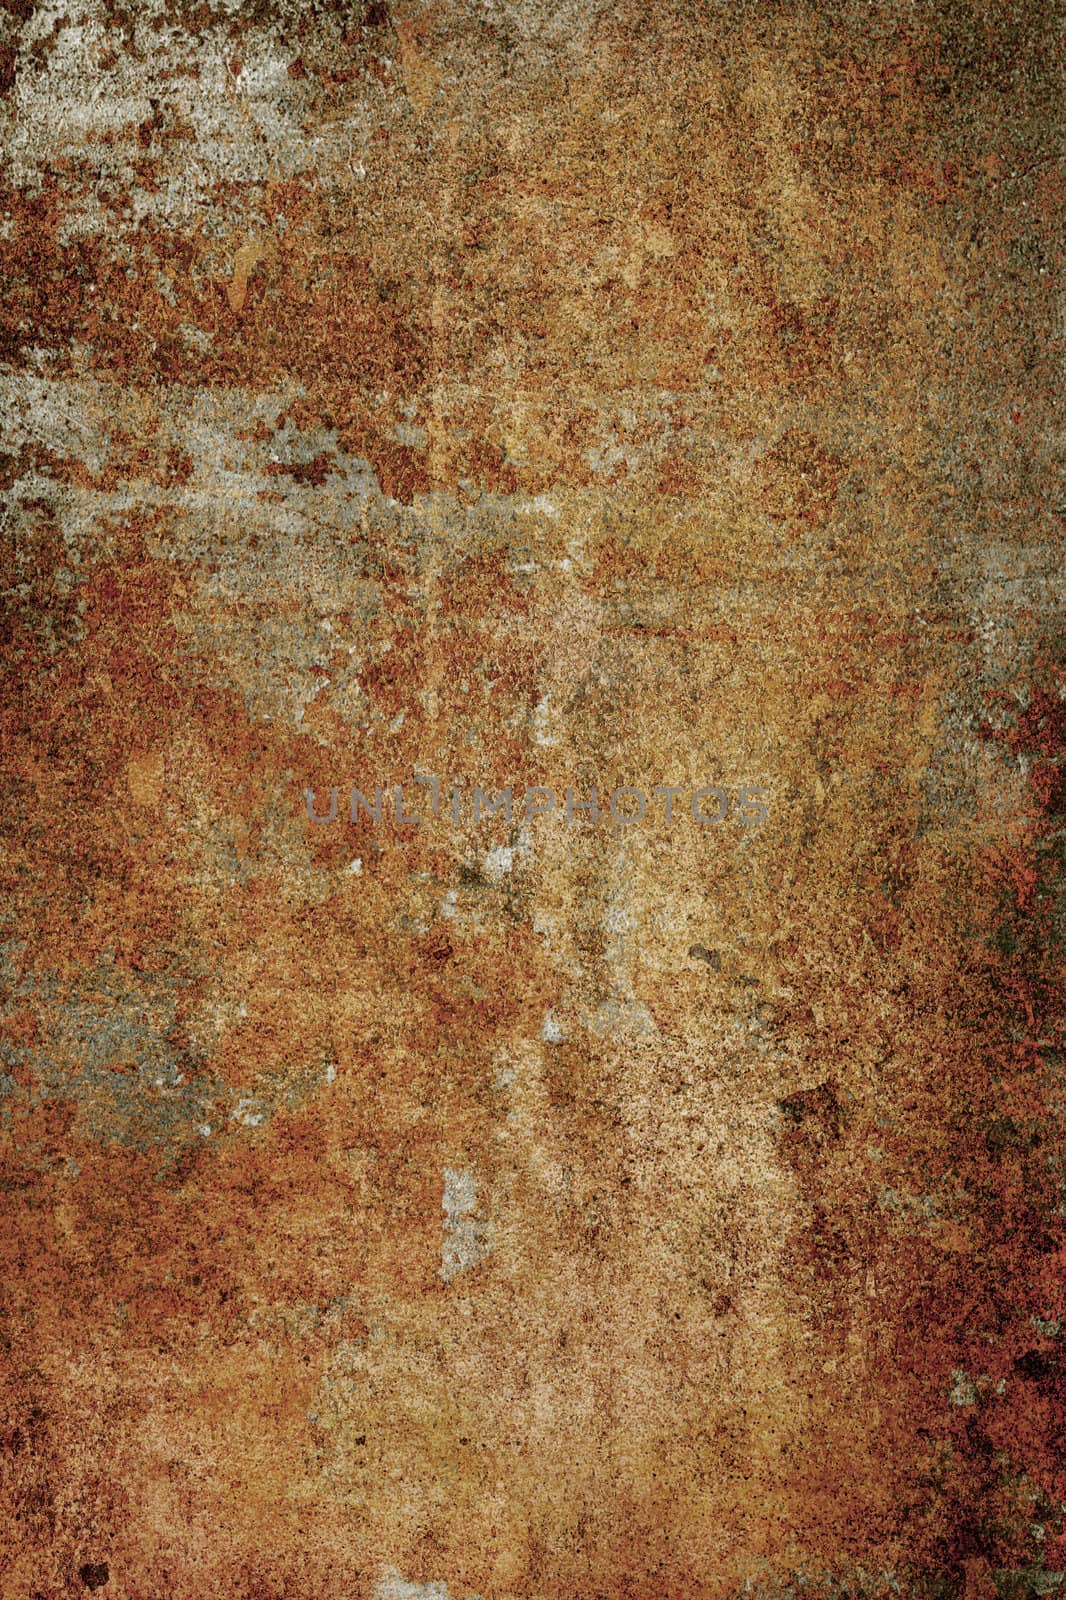 Abstract grunge background with old ragged texture Abstract grunge background with old ragged texture